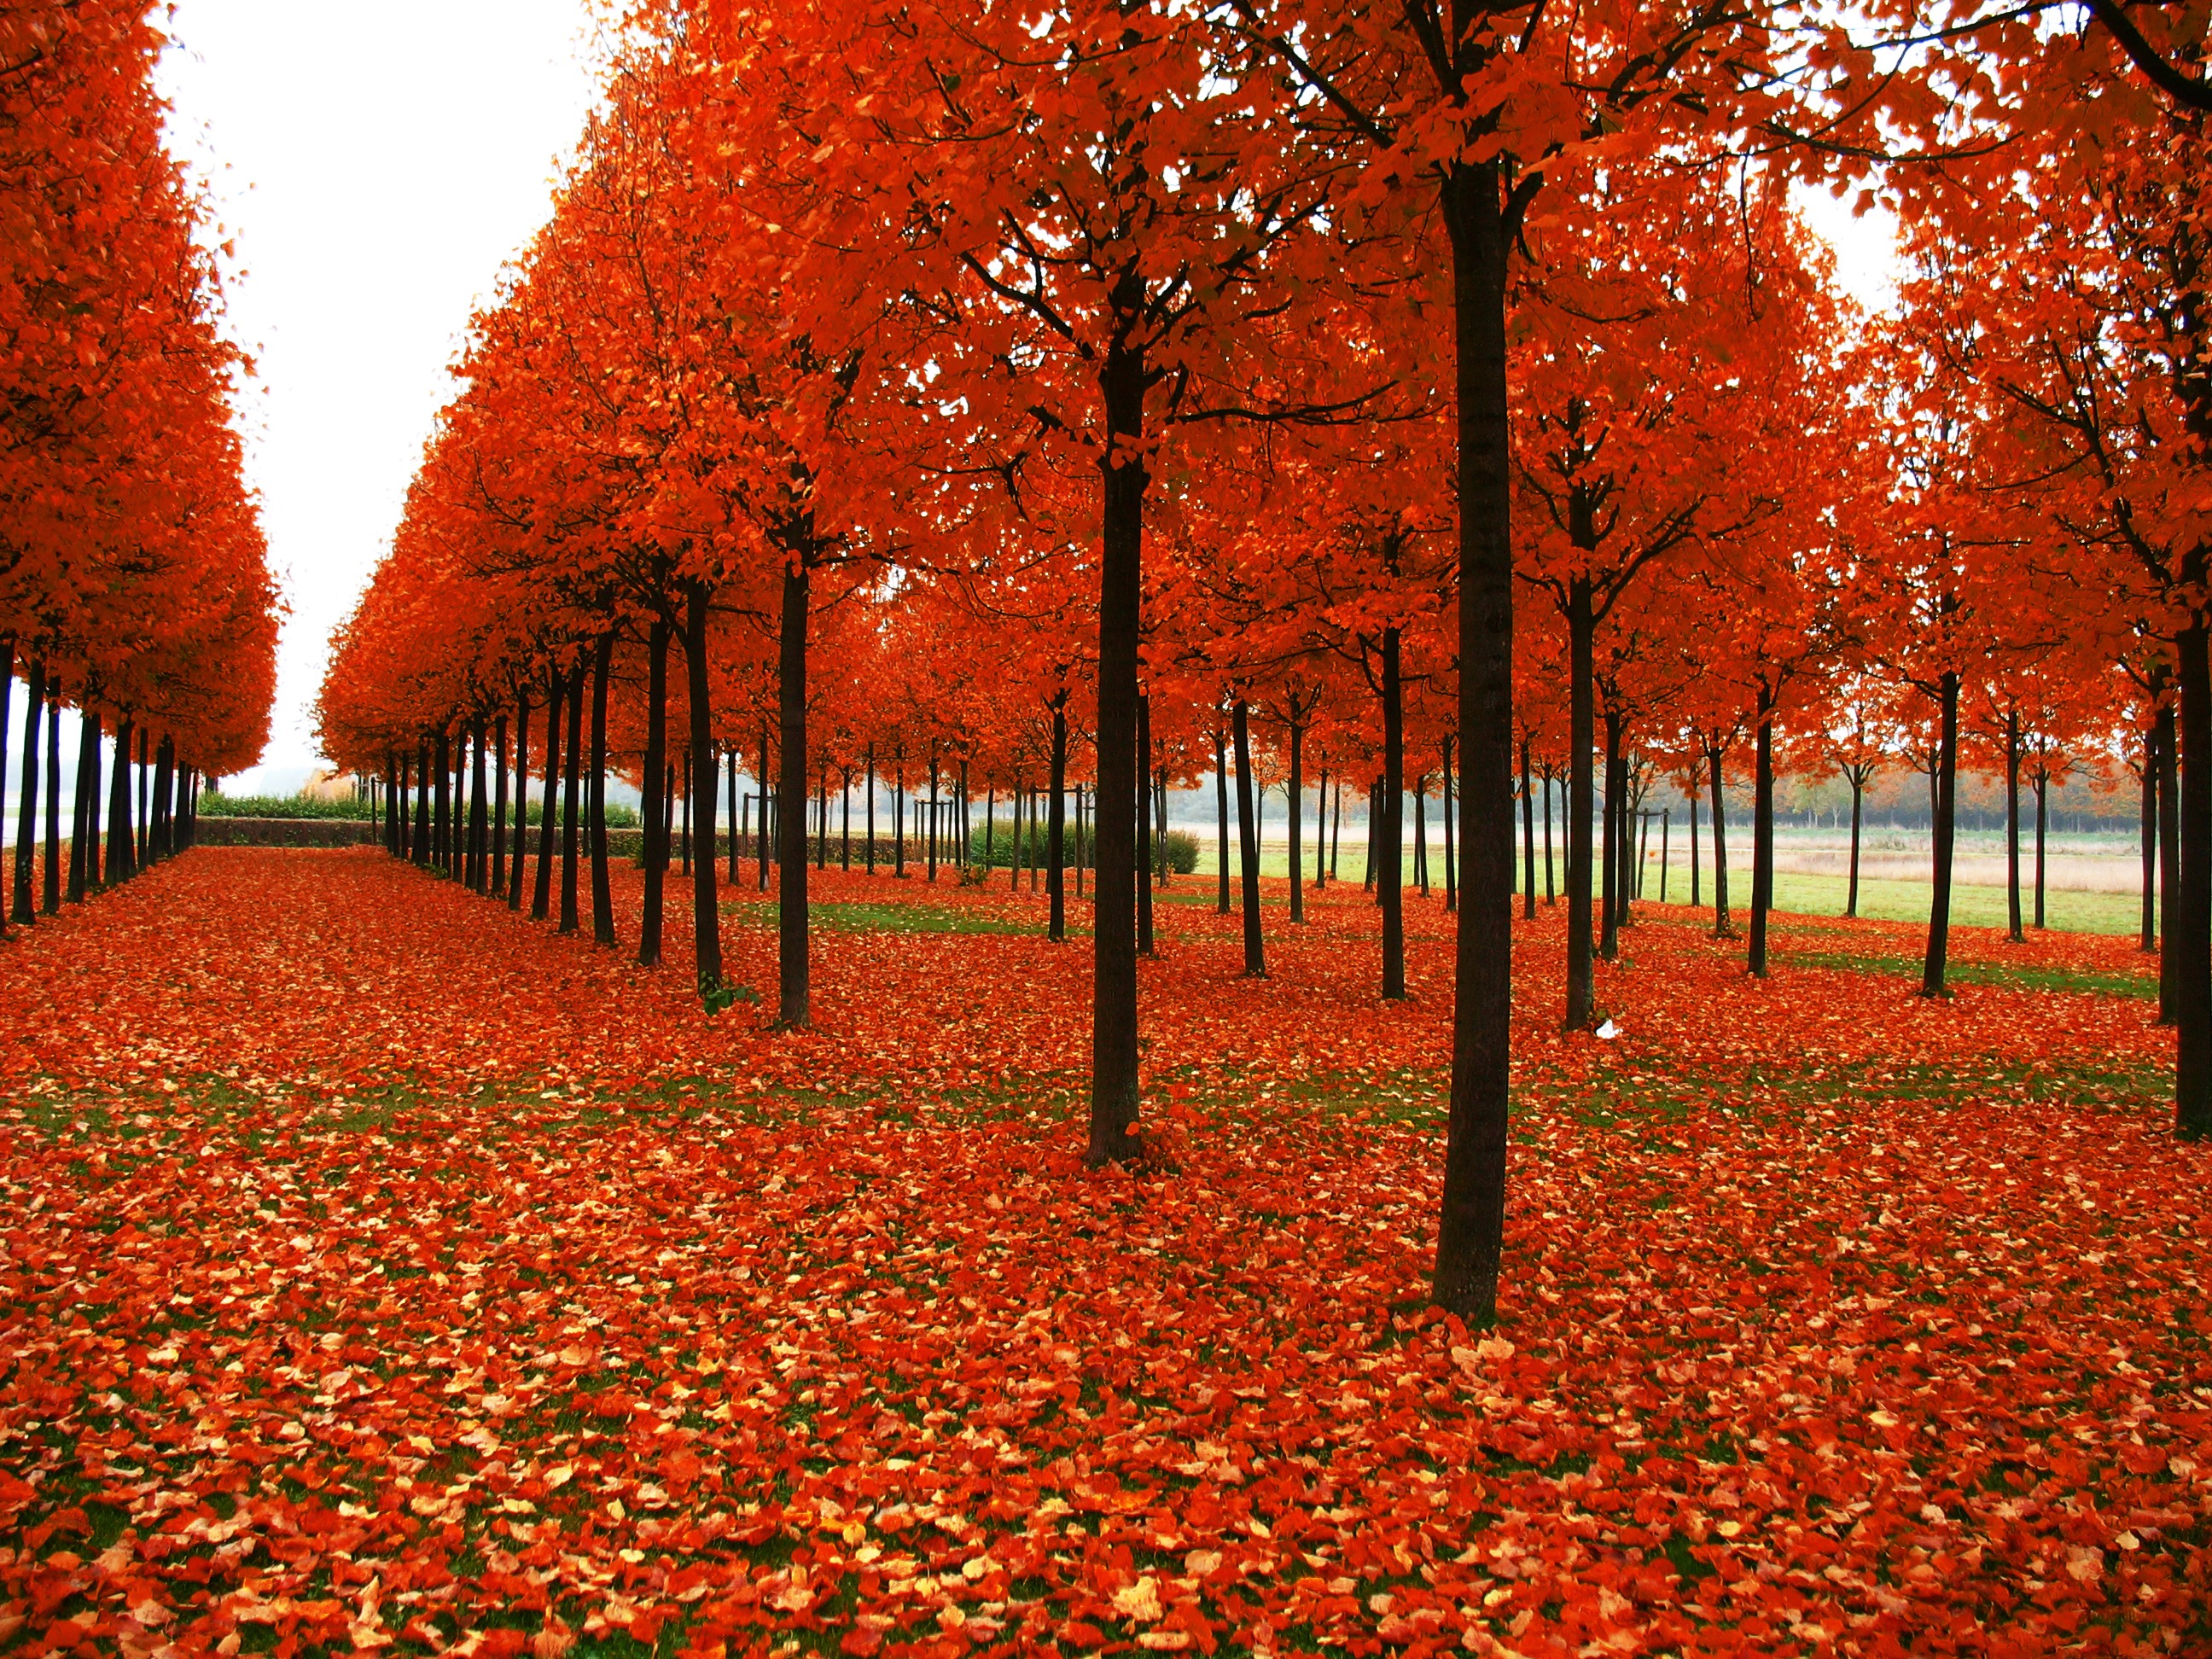 General 2592x1944 fall trees fallen leaves leaves plants outdoors